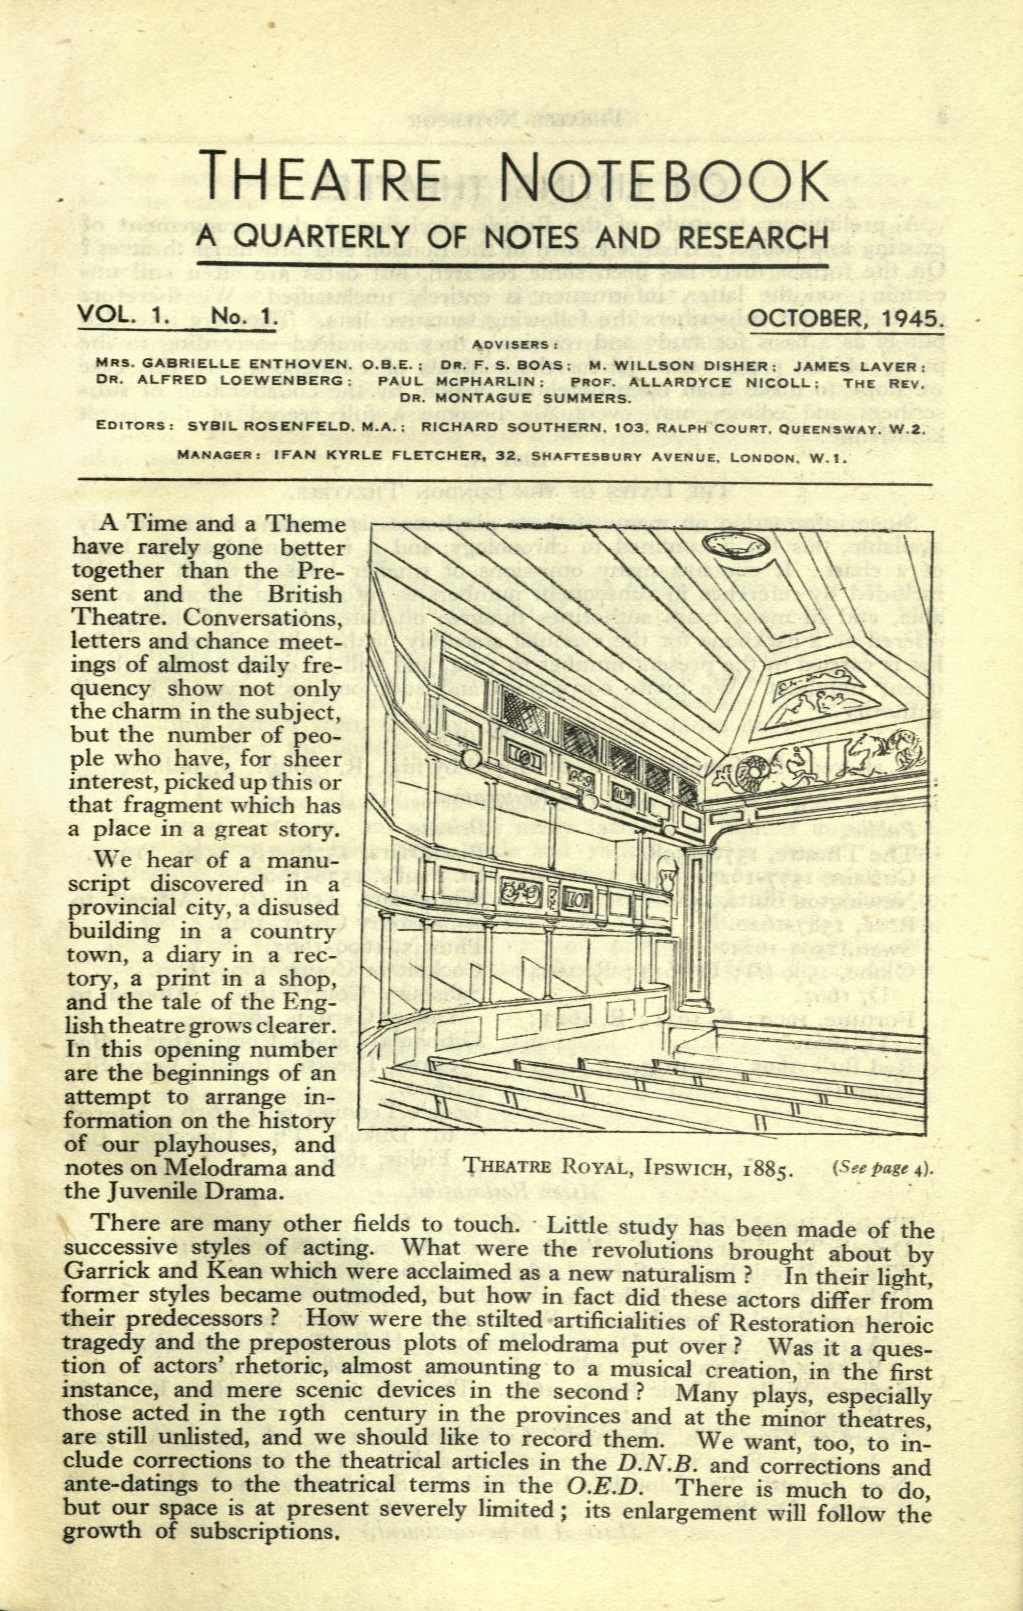 First edition of Theatre Notebook, 1945, V&A Theatre & Performance Library